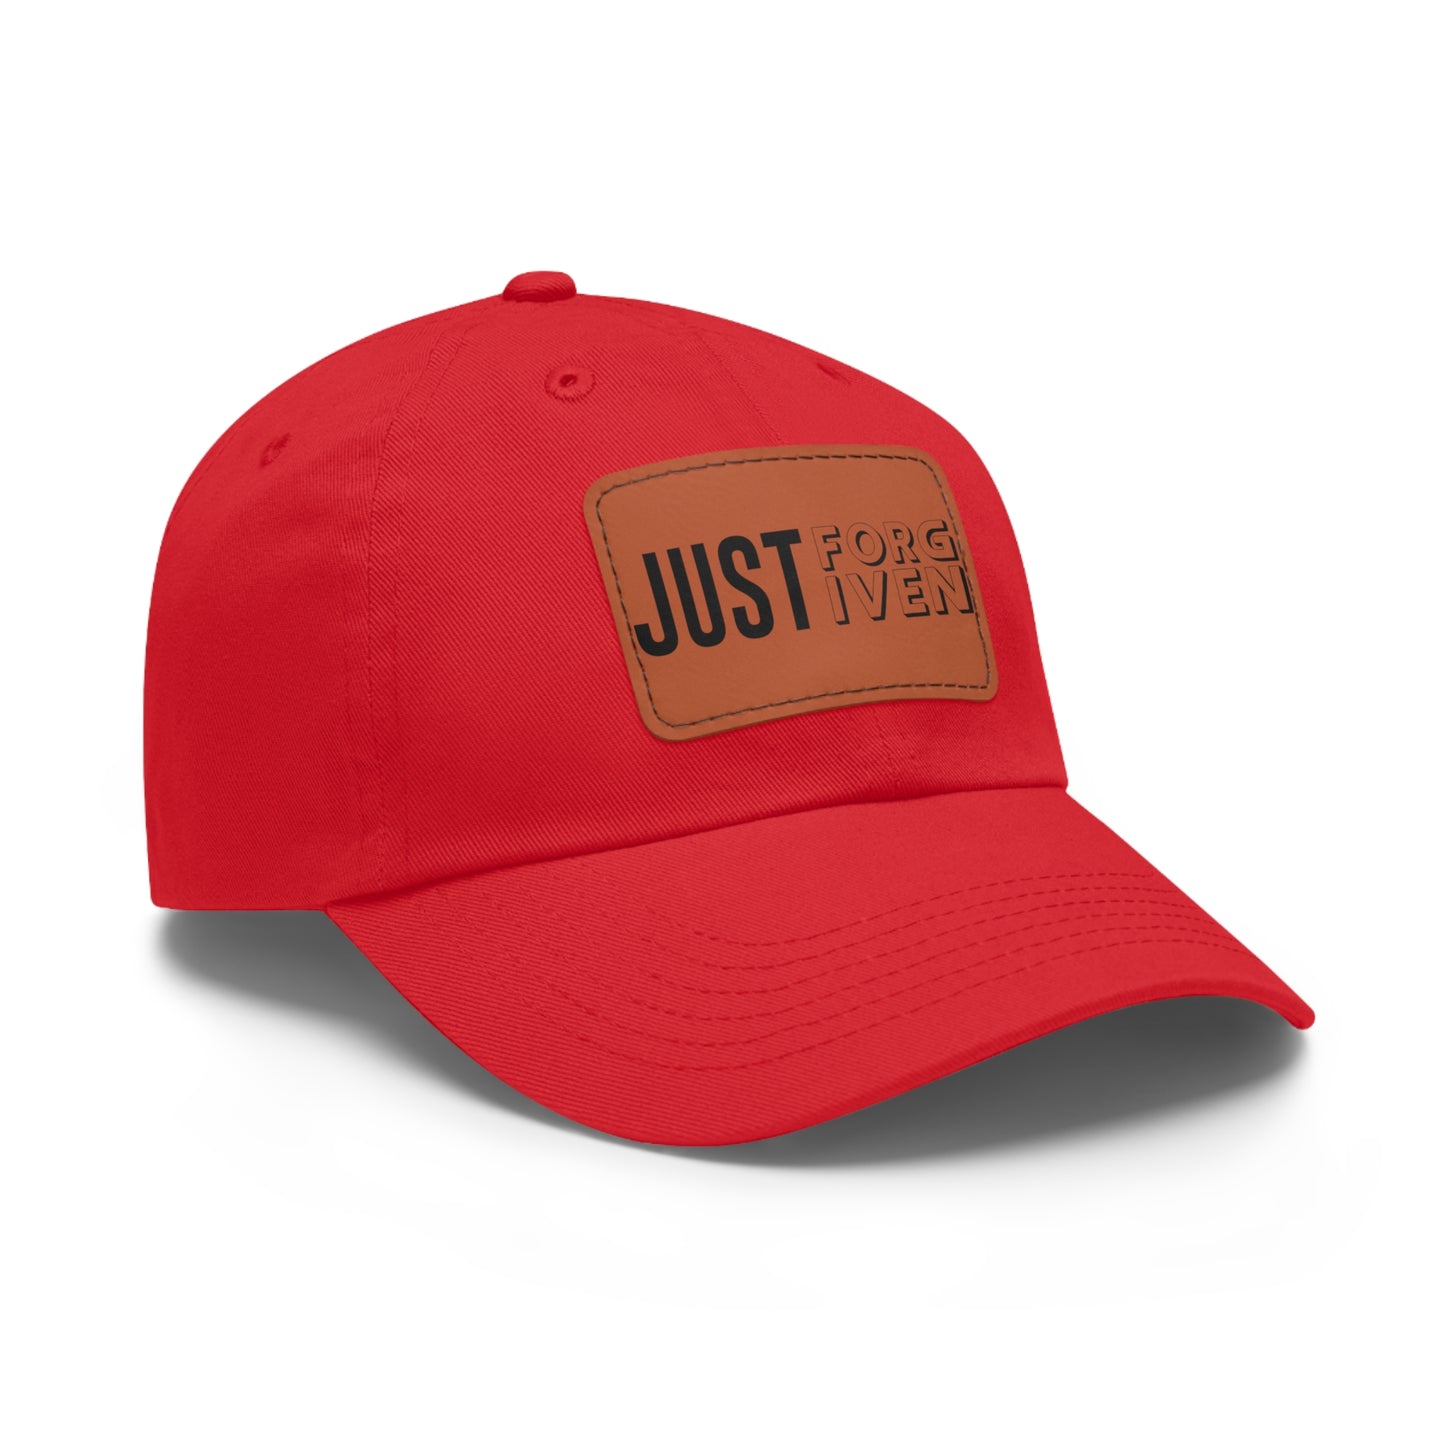 JUST FORGIVEN - LEATHER PATCH CAP